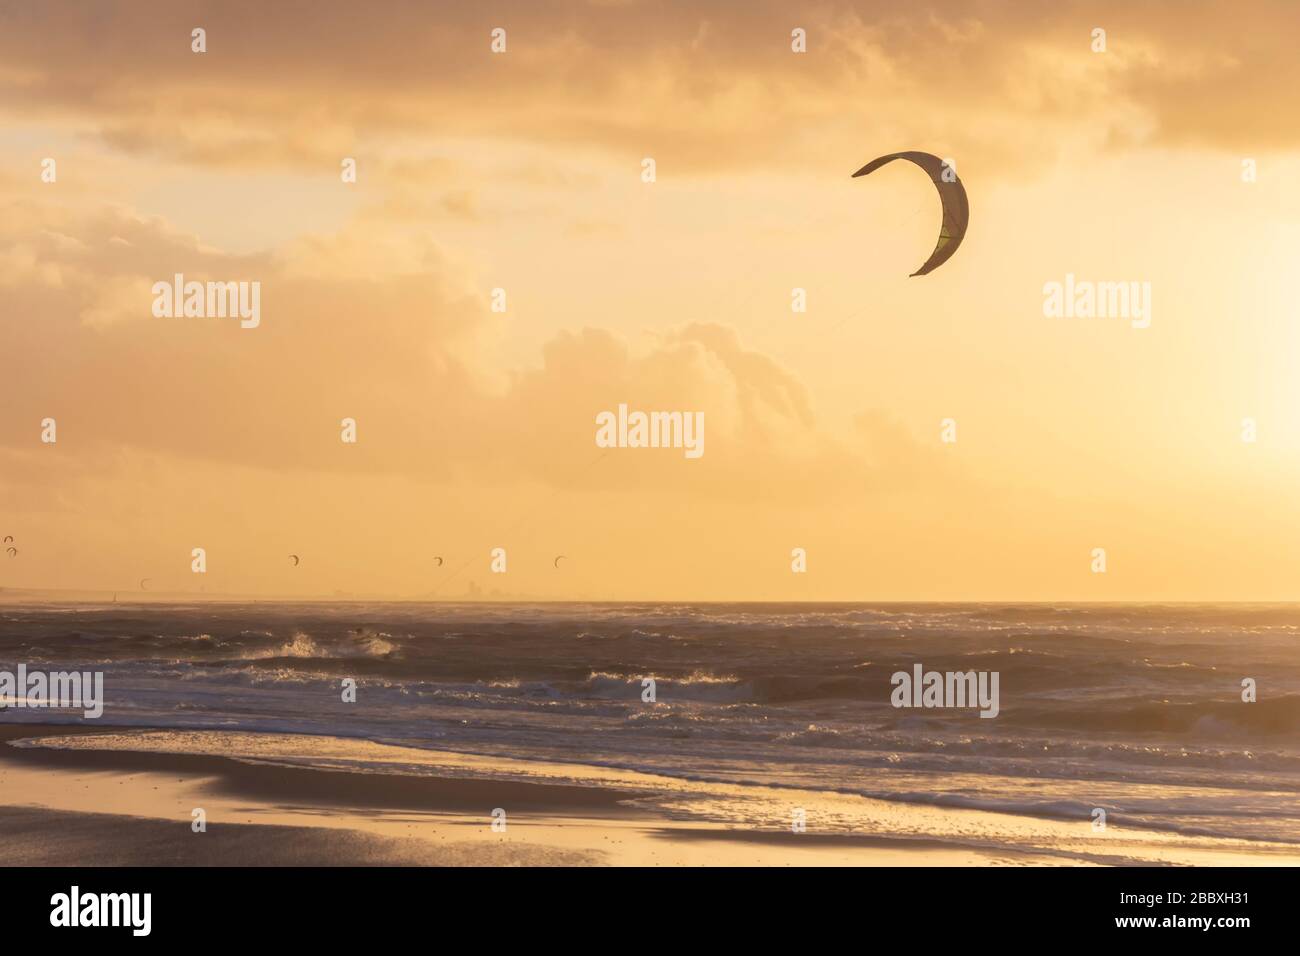 View of the north sea beach on a windy winter day at sunset, people, kitesurfing. Noordwijk, the Netherlands Stock Photo